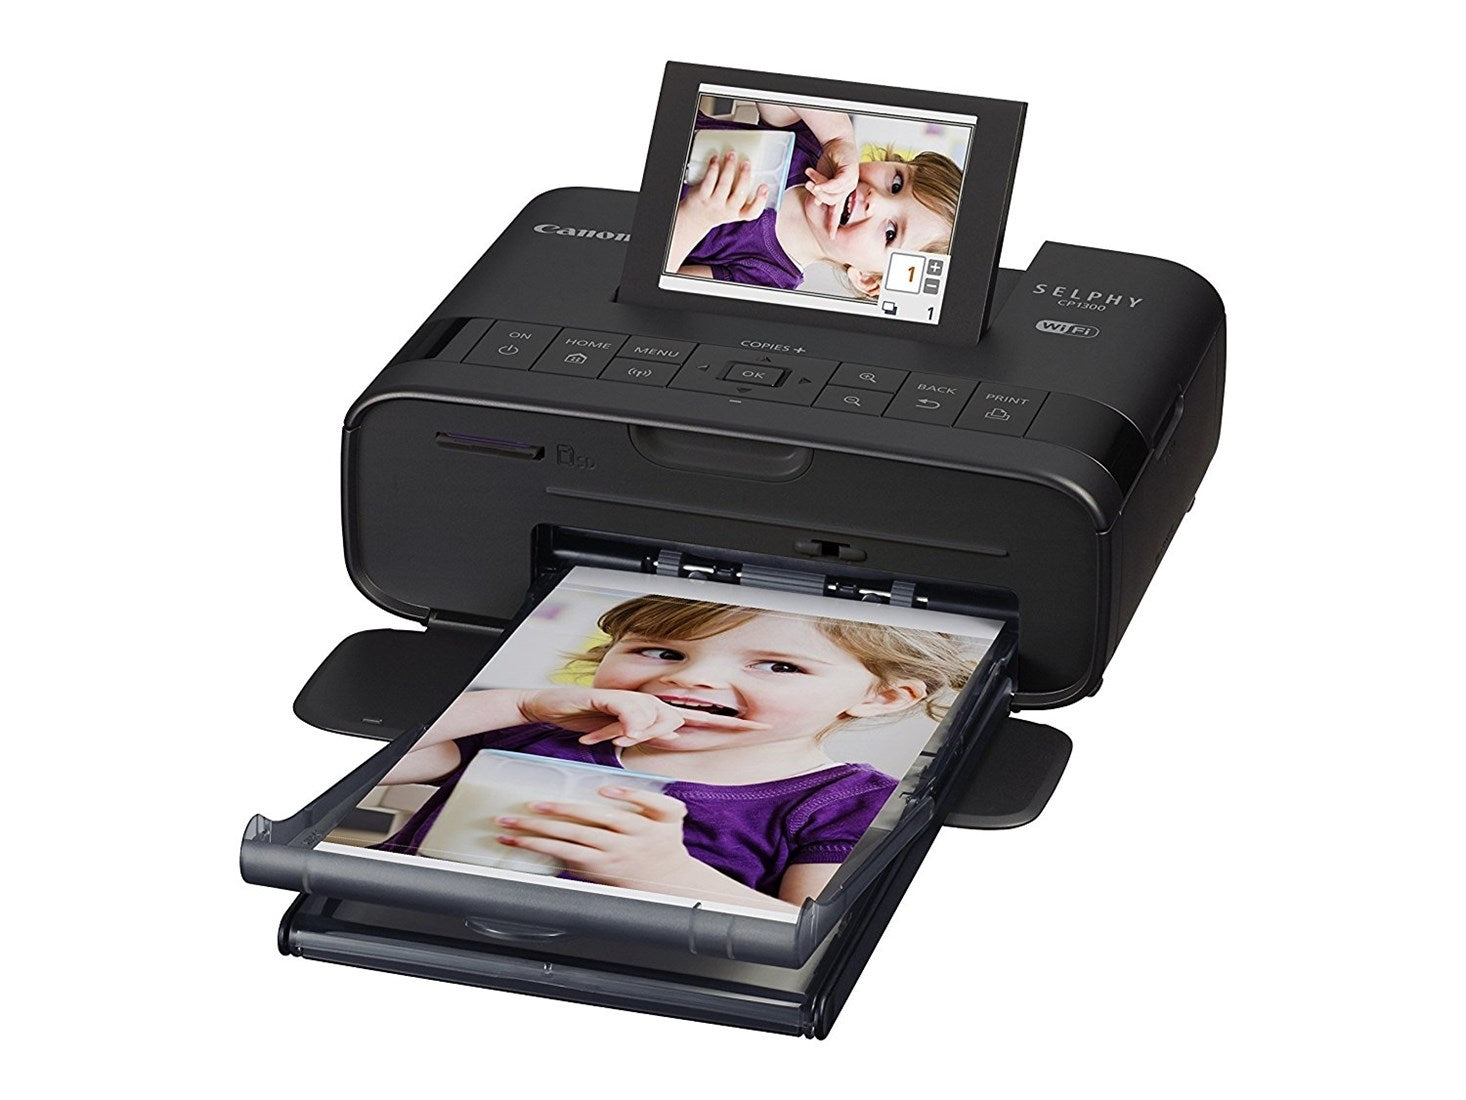 Canon SELPHY CP1300 Compact Photo Printer - Black & RP-108IN Ink & paper pack